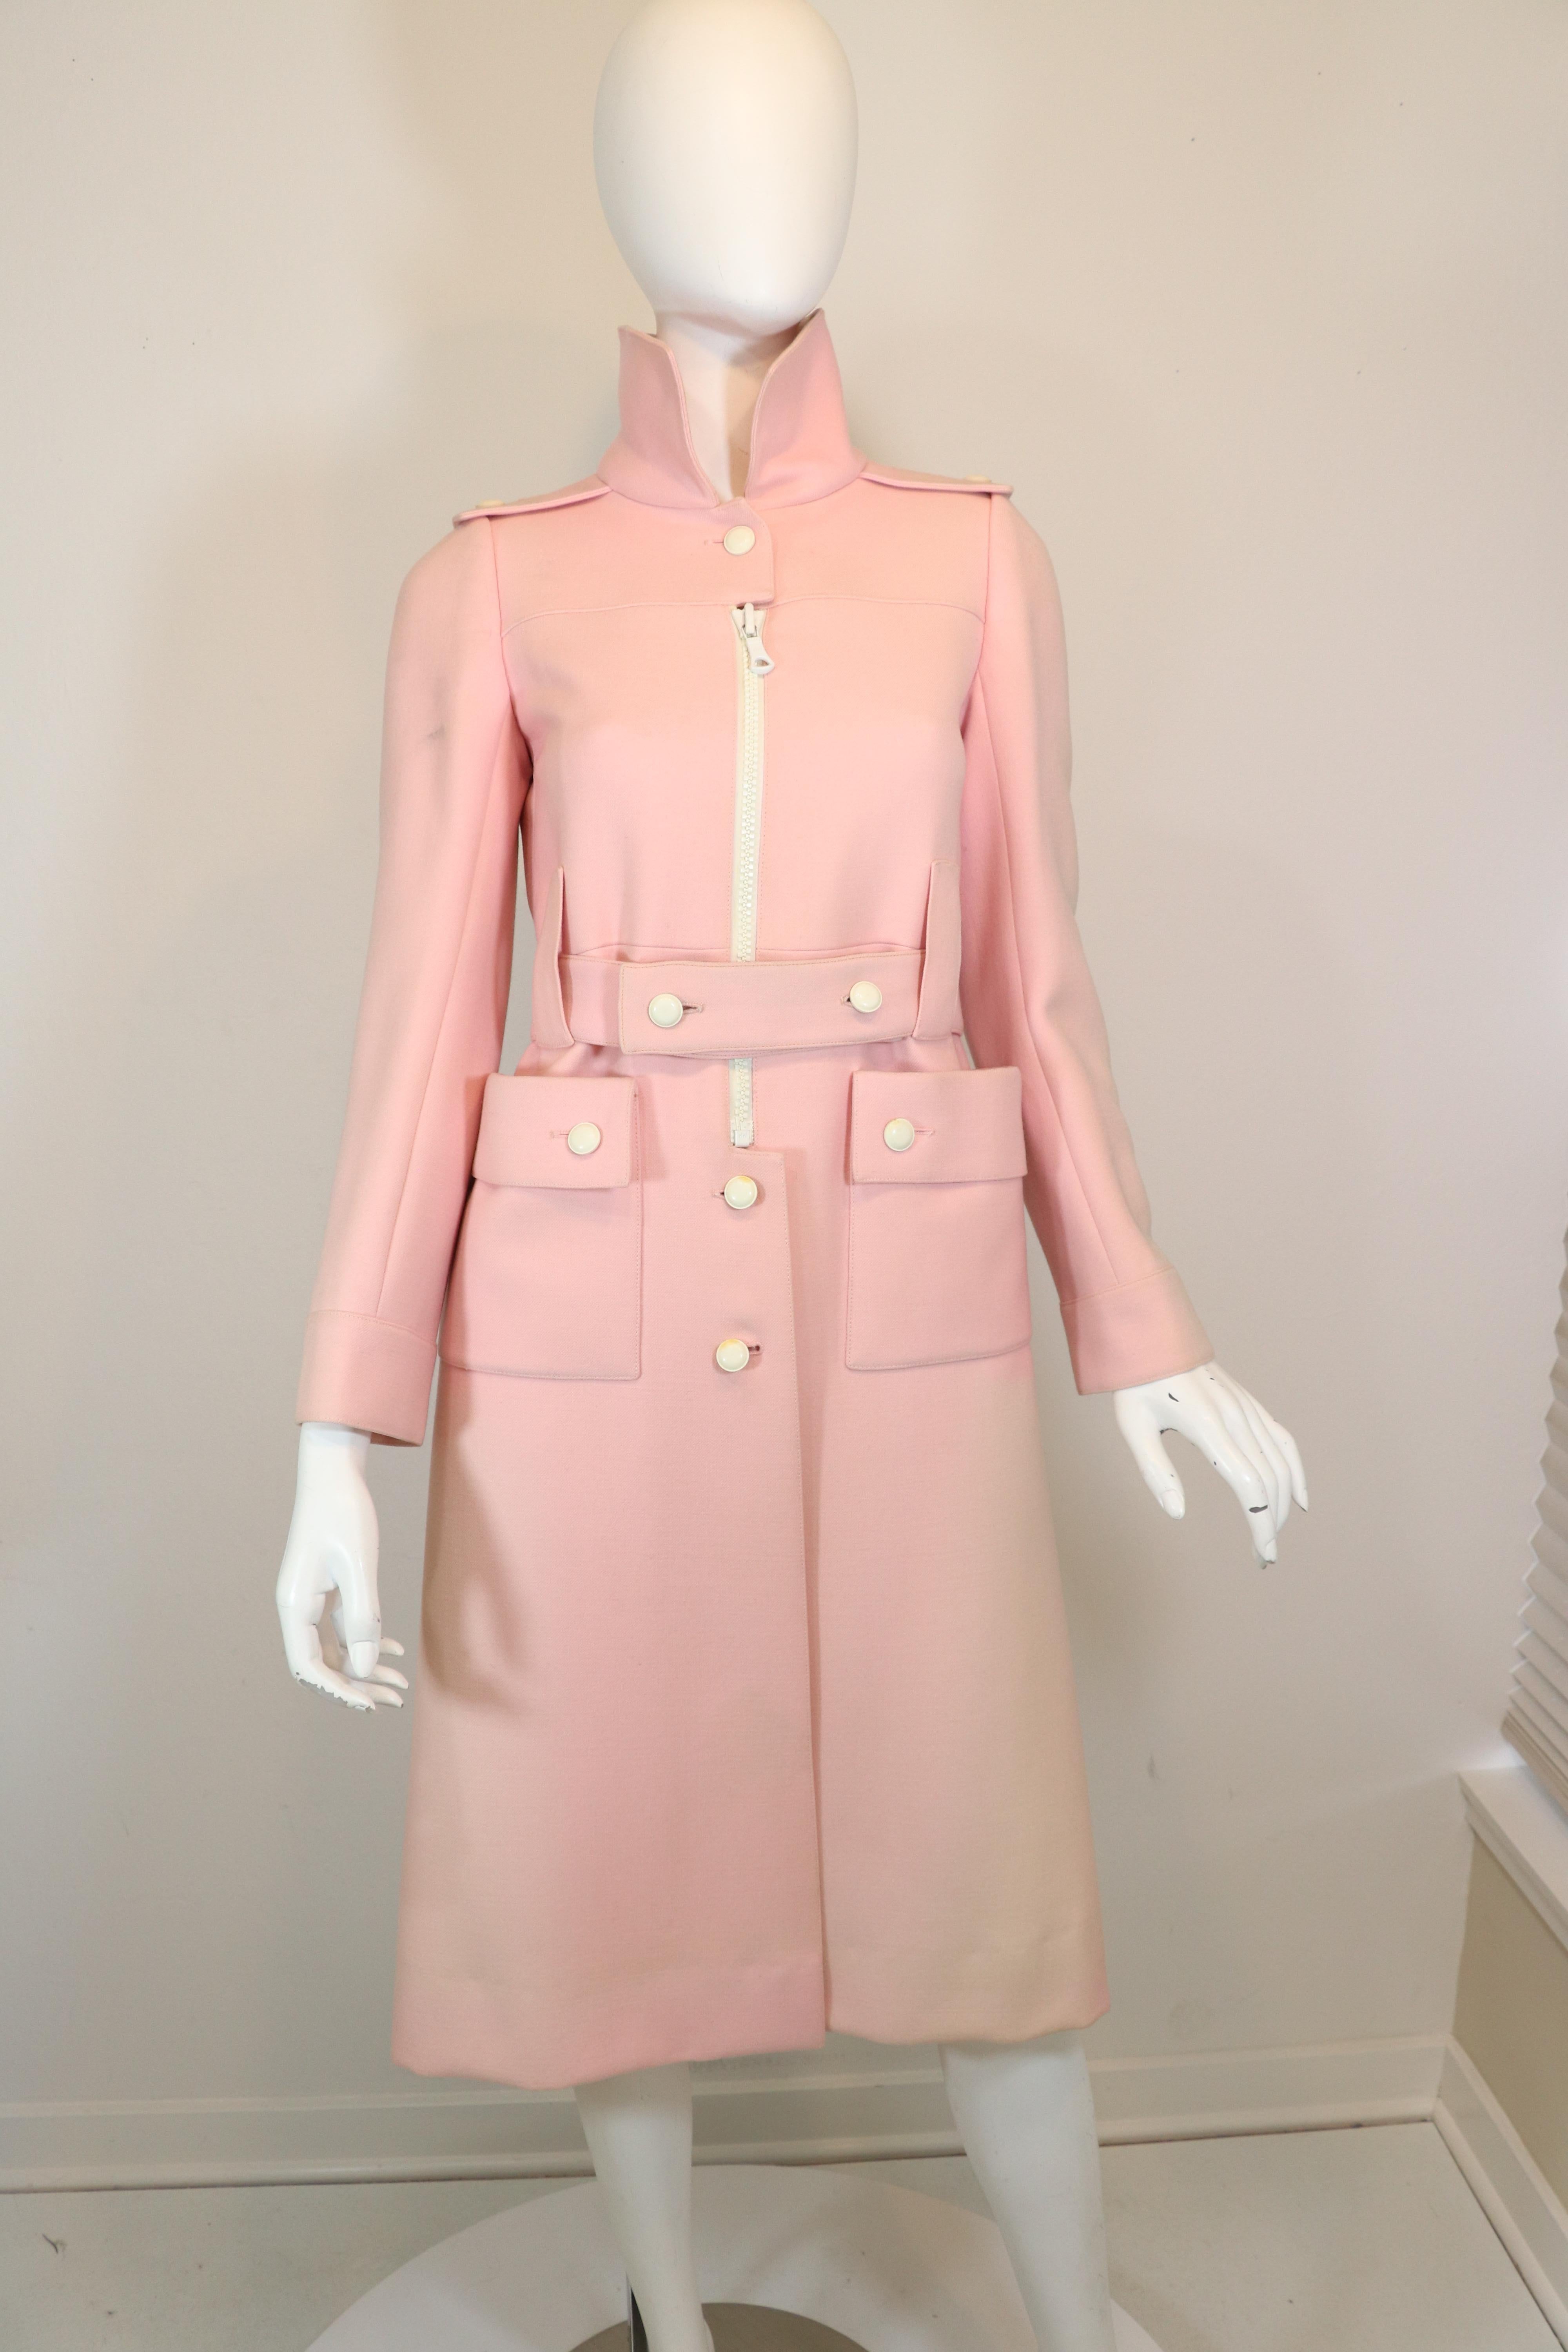 Courreges Couture Future vintage coat from the 1970's: Pink with white embellishments; a white half zippered front, white buttons. Coat has a belt with two white button fastenings. Coat features two front pockets. Fade to fabric down sides, spots